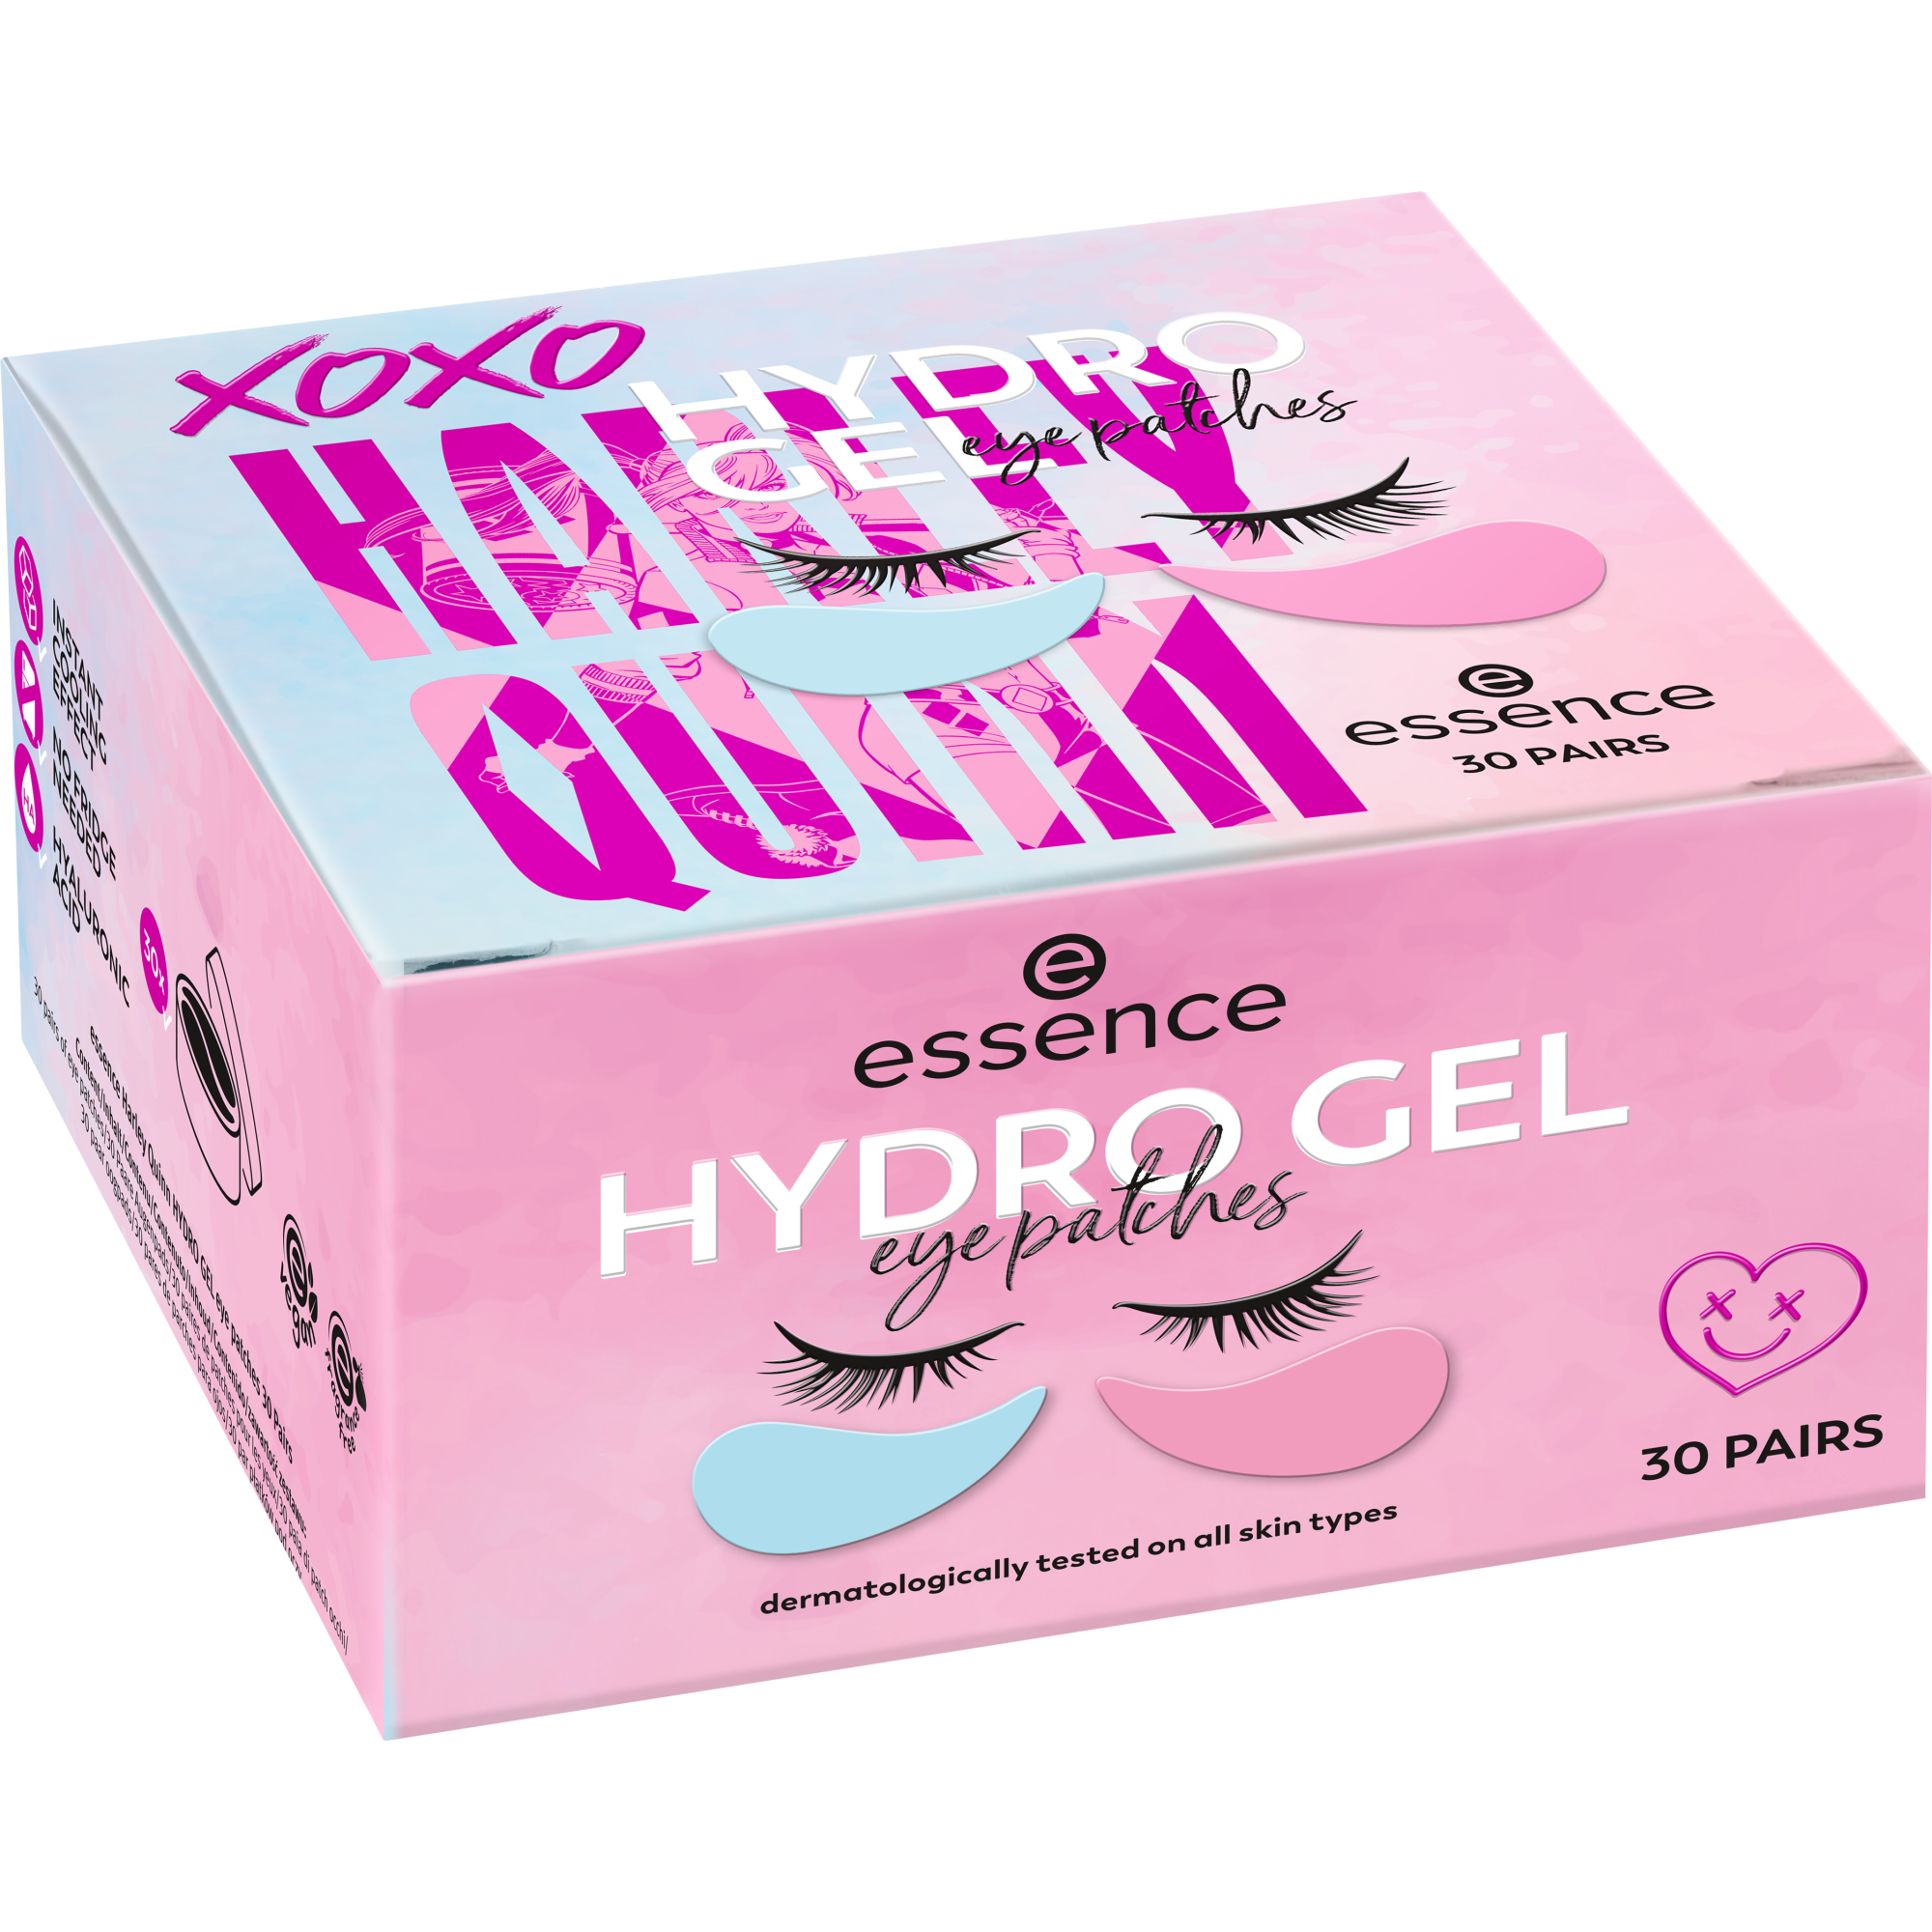 Patche occhi Harley Quinn HYDRO GEL 30 paia